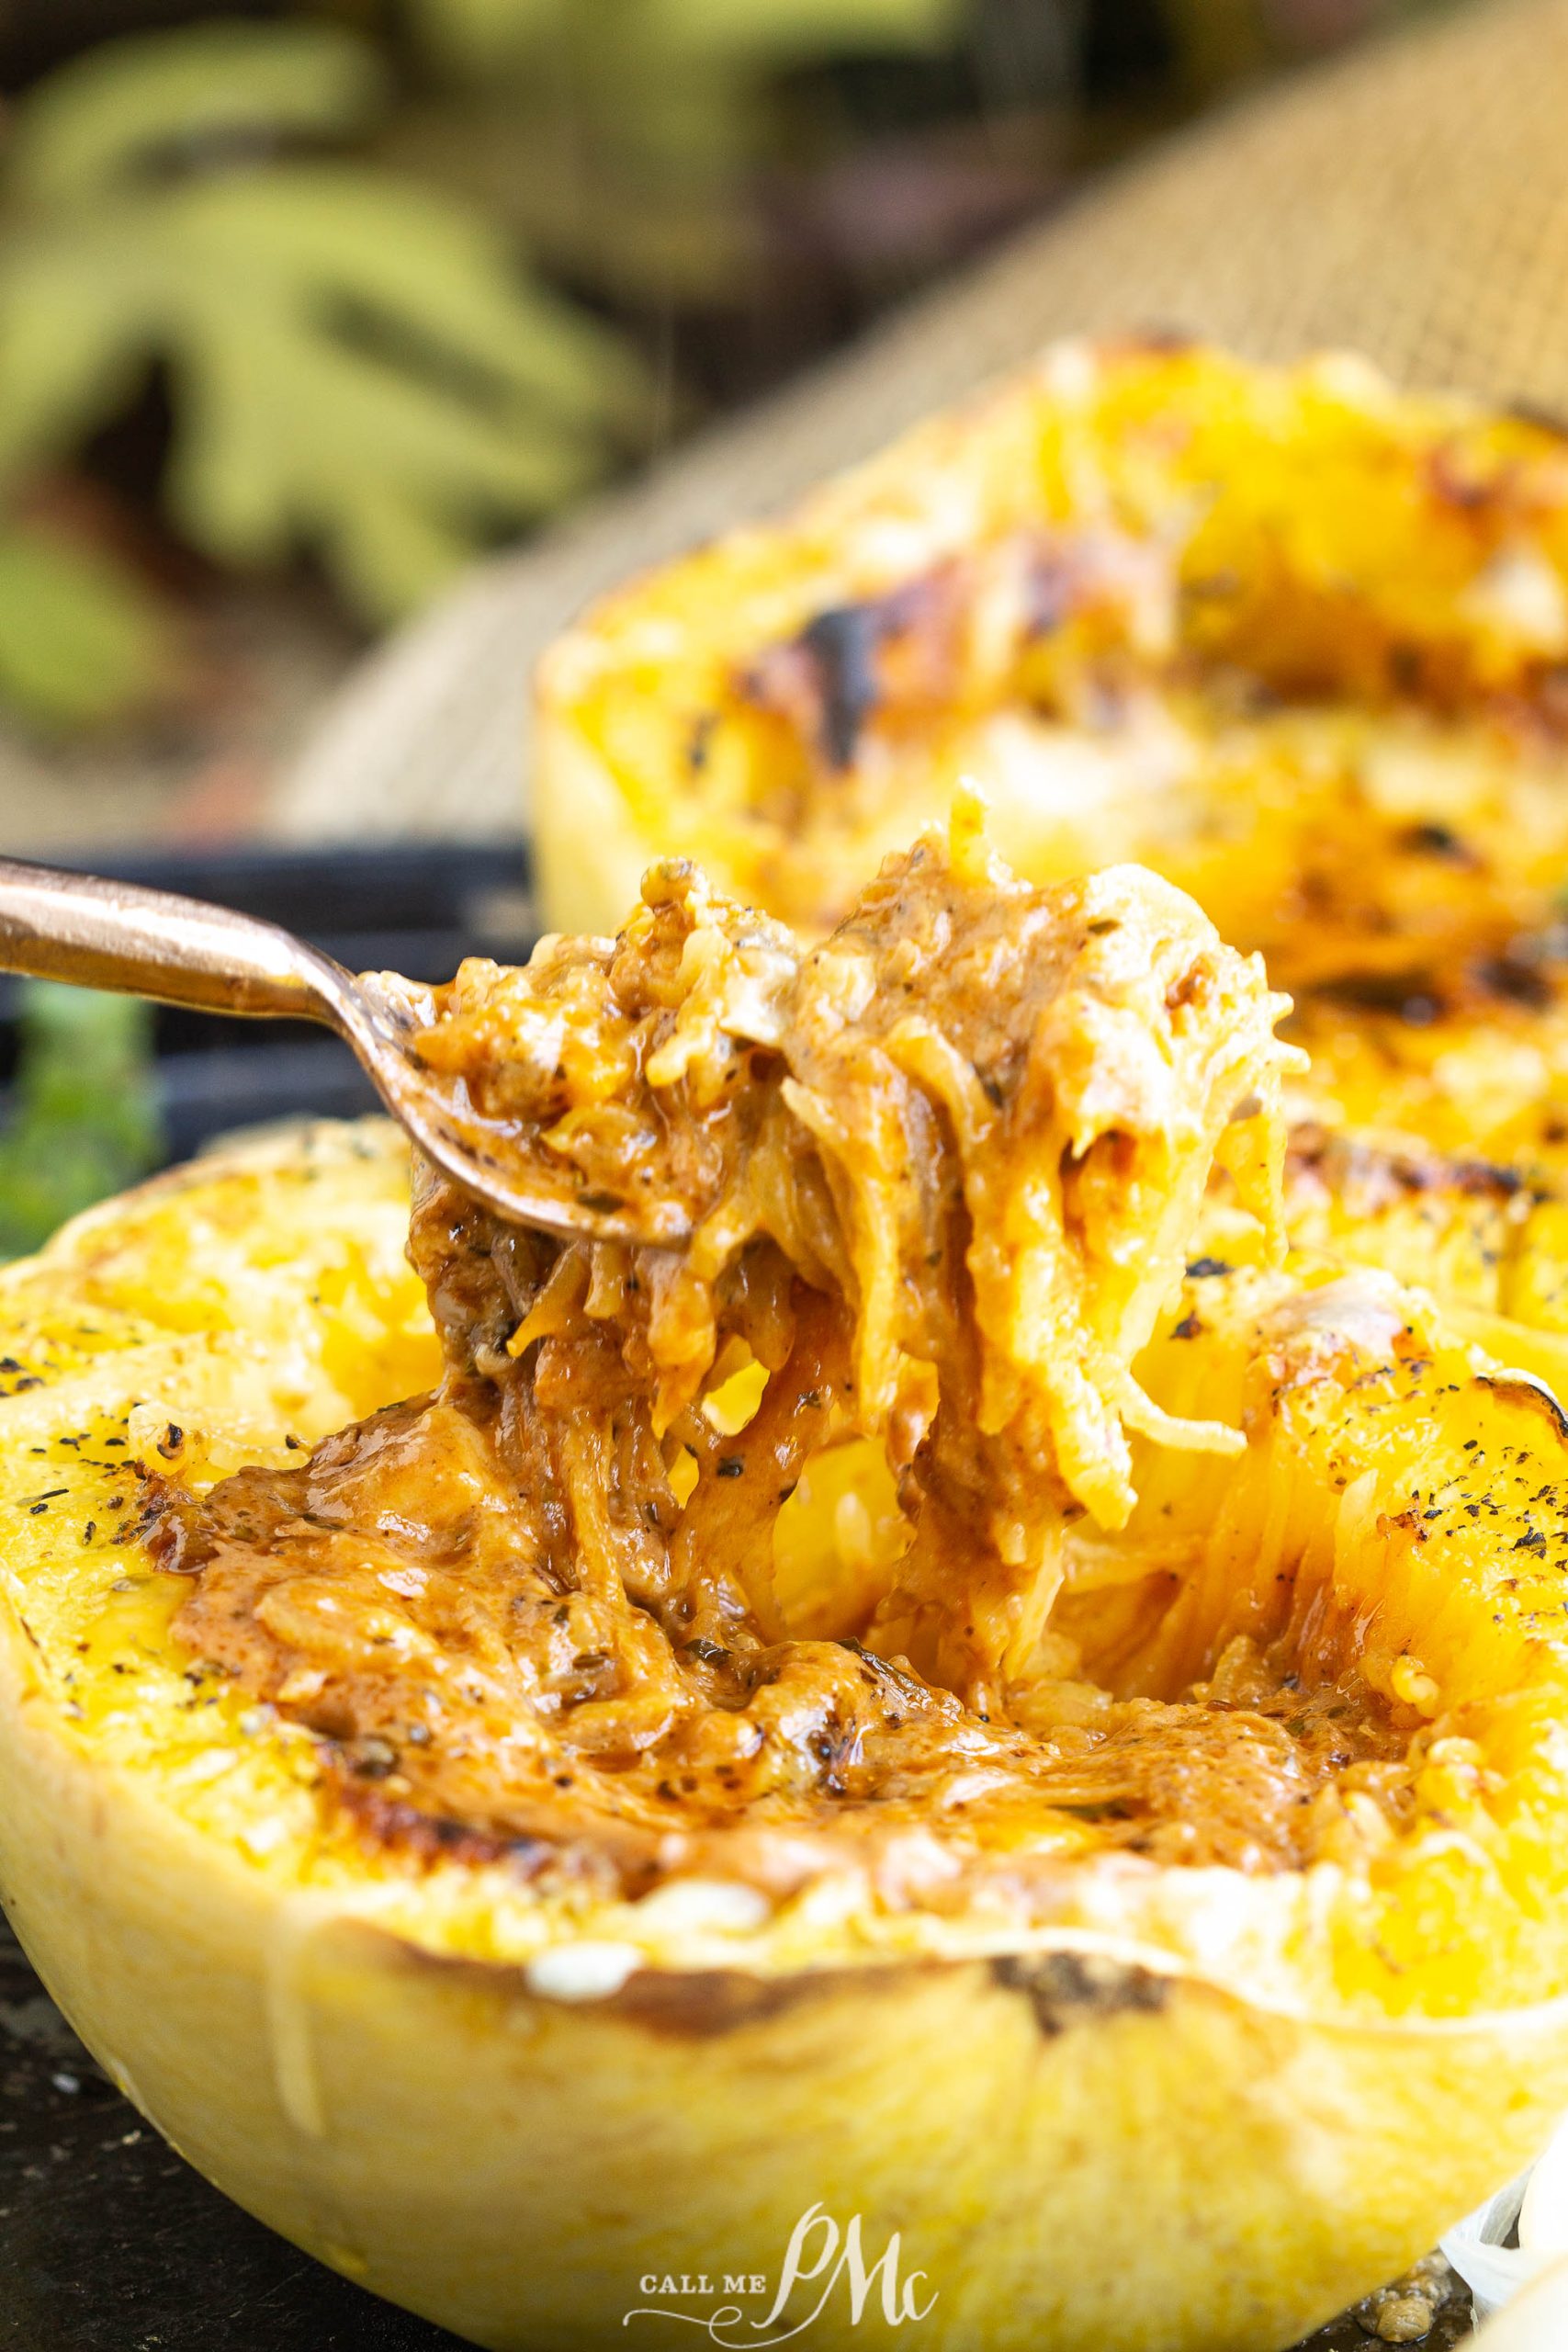 A spoon is used to take out vodka sauce from inside a spaghetti squash boat.